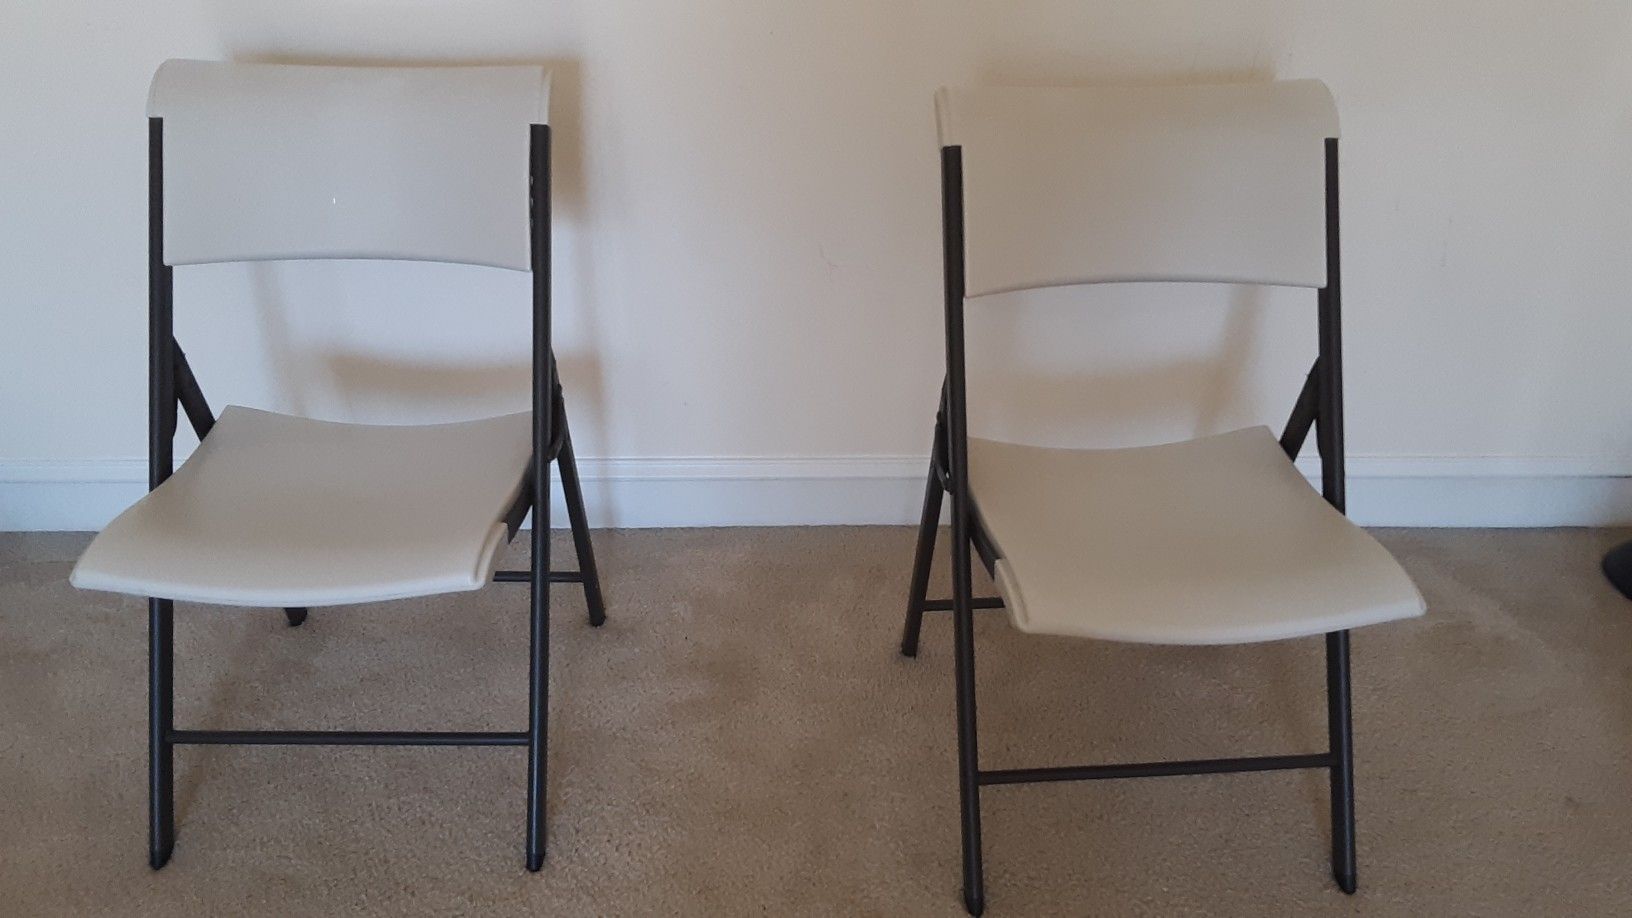 2 Foldable chairs